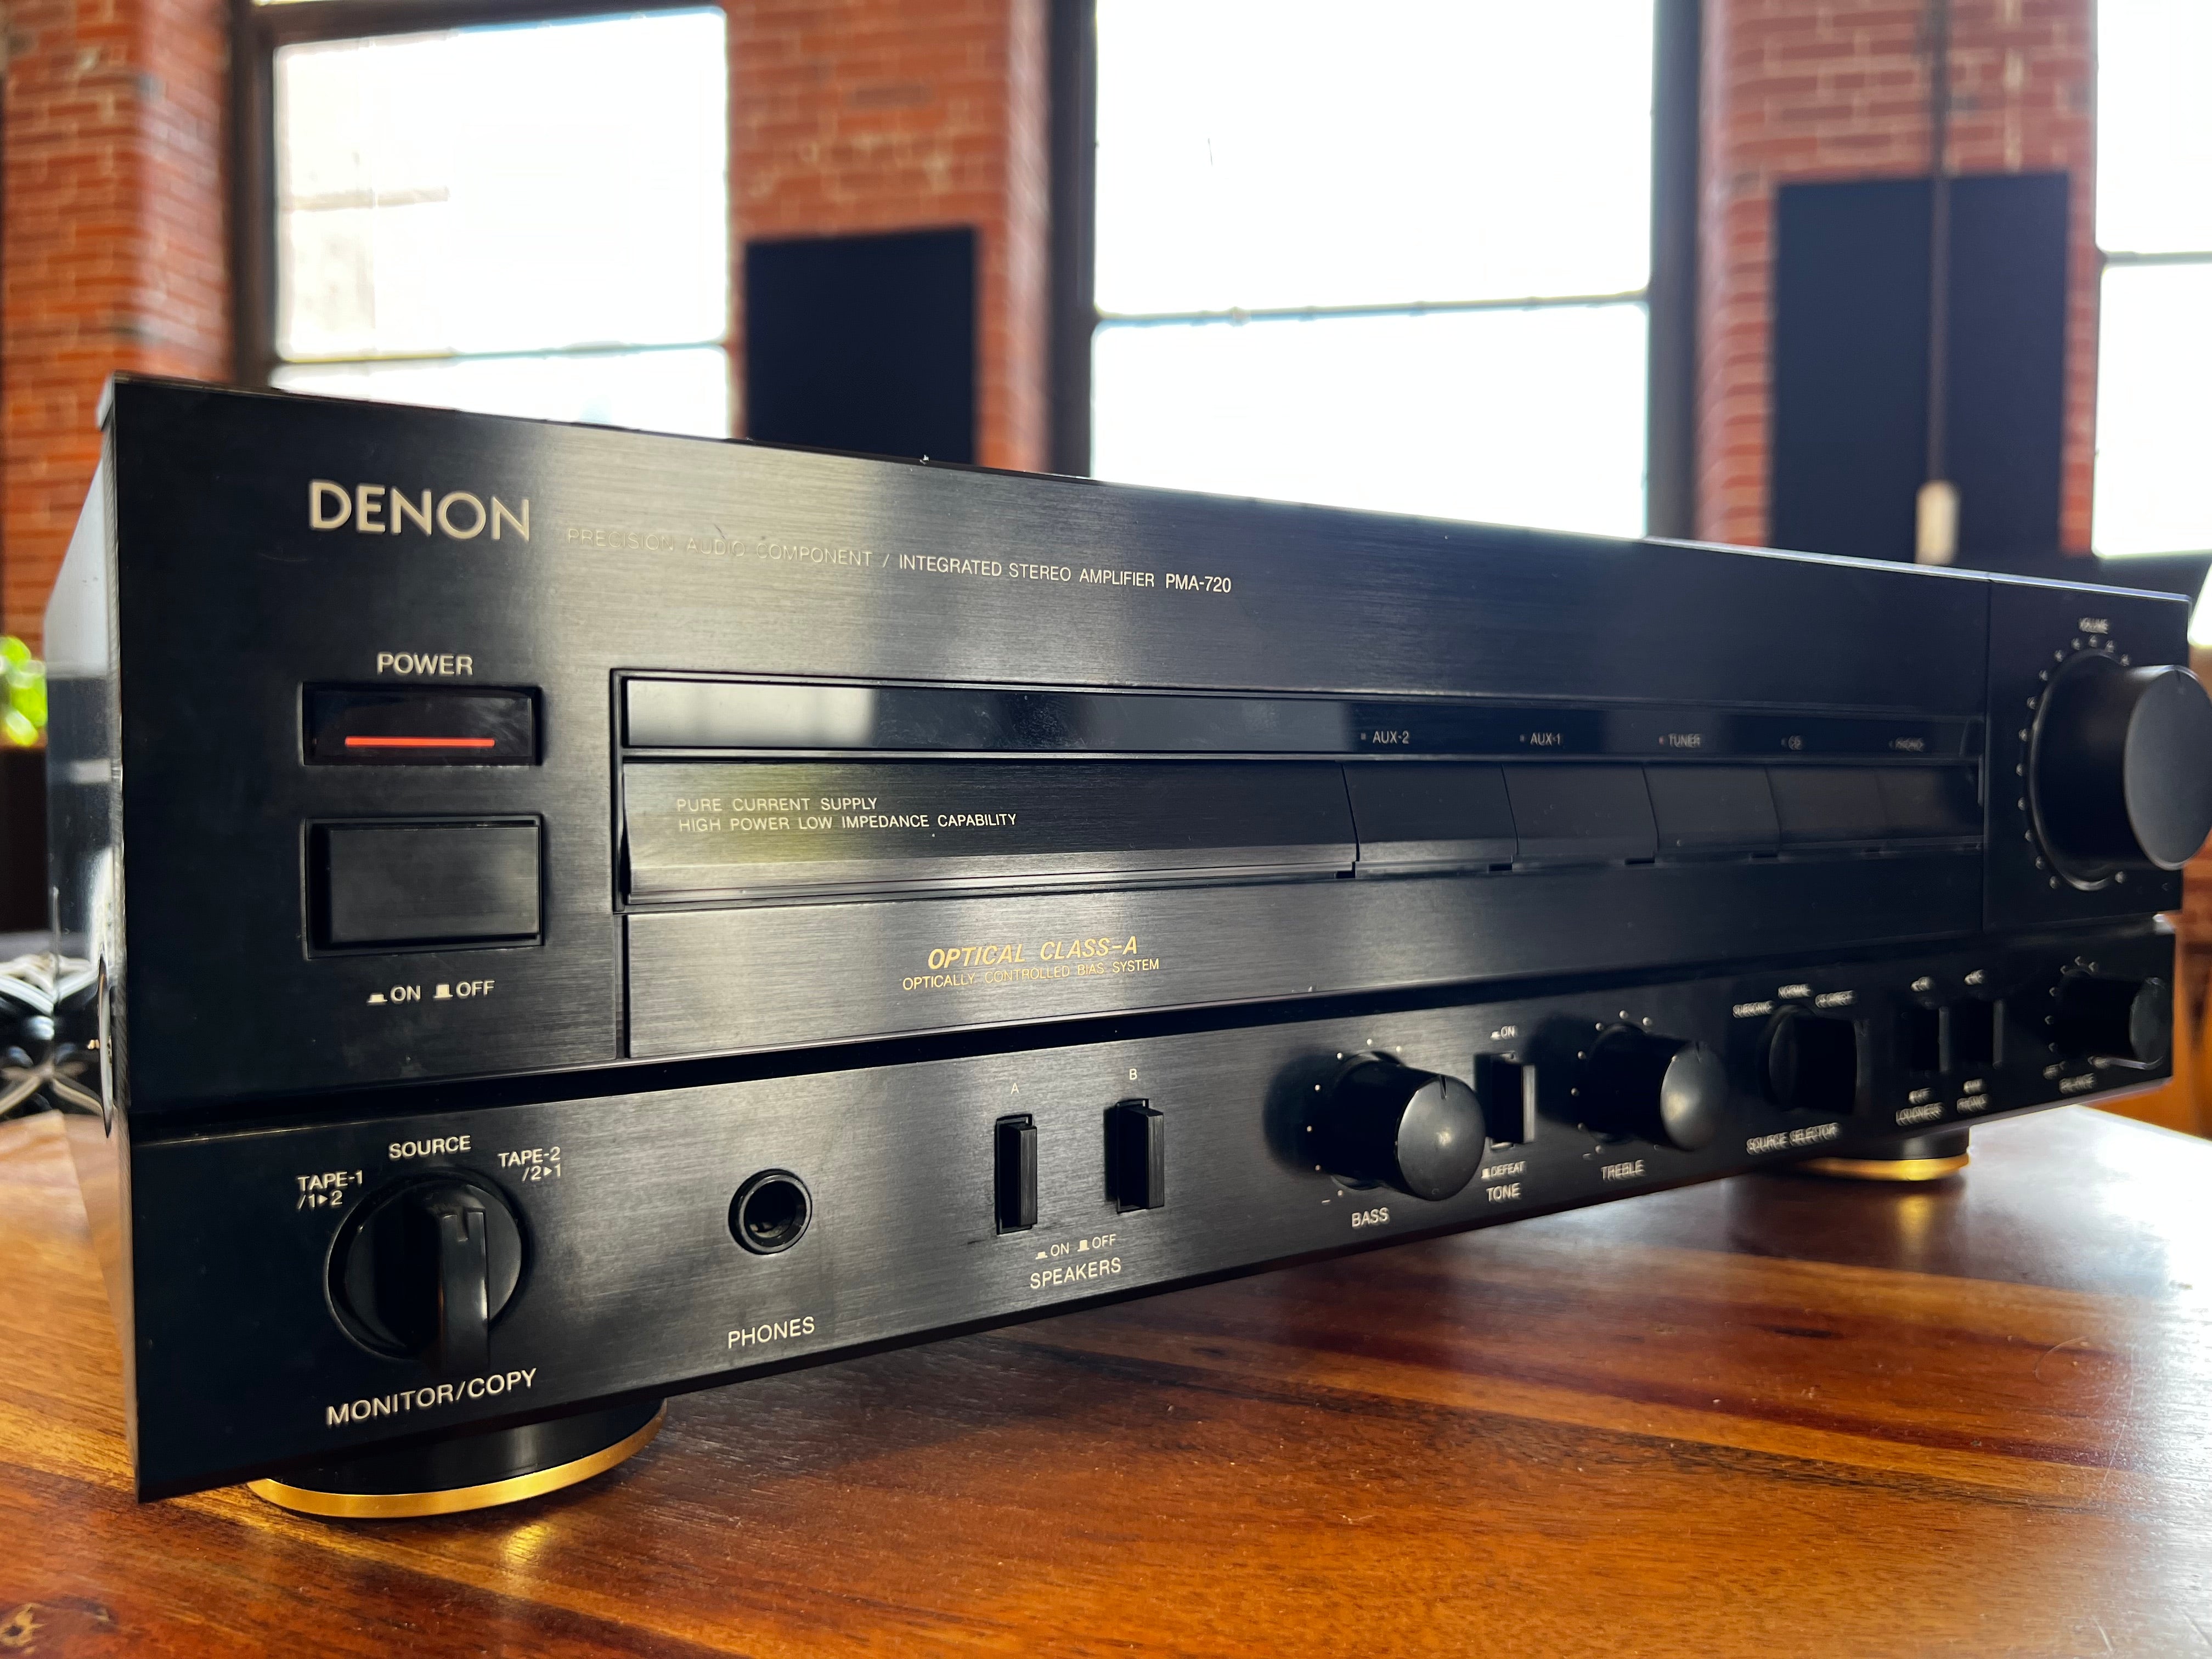 Denon PMA-720 Stereo Integrated Amplifier, Clean Power - SOLD